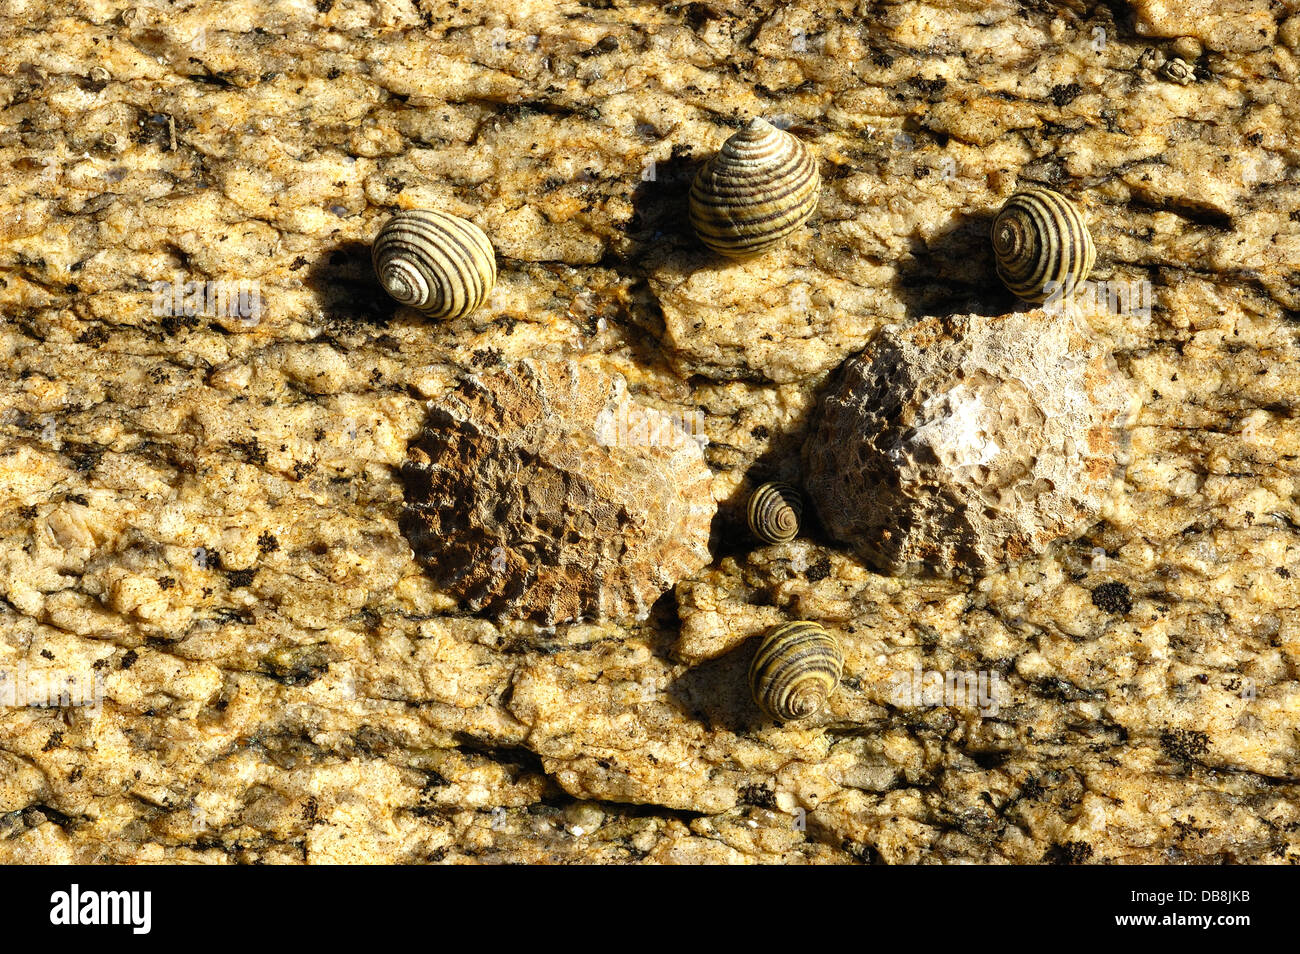 Limpets and sea snails Stock Photo